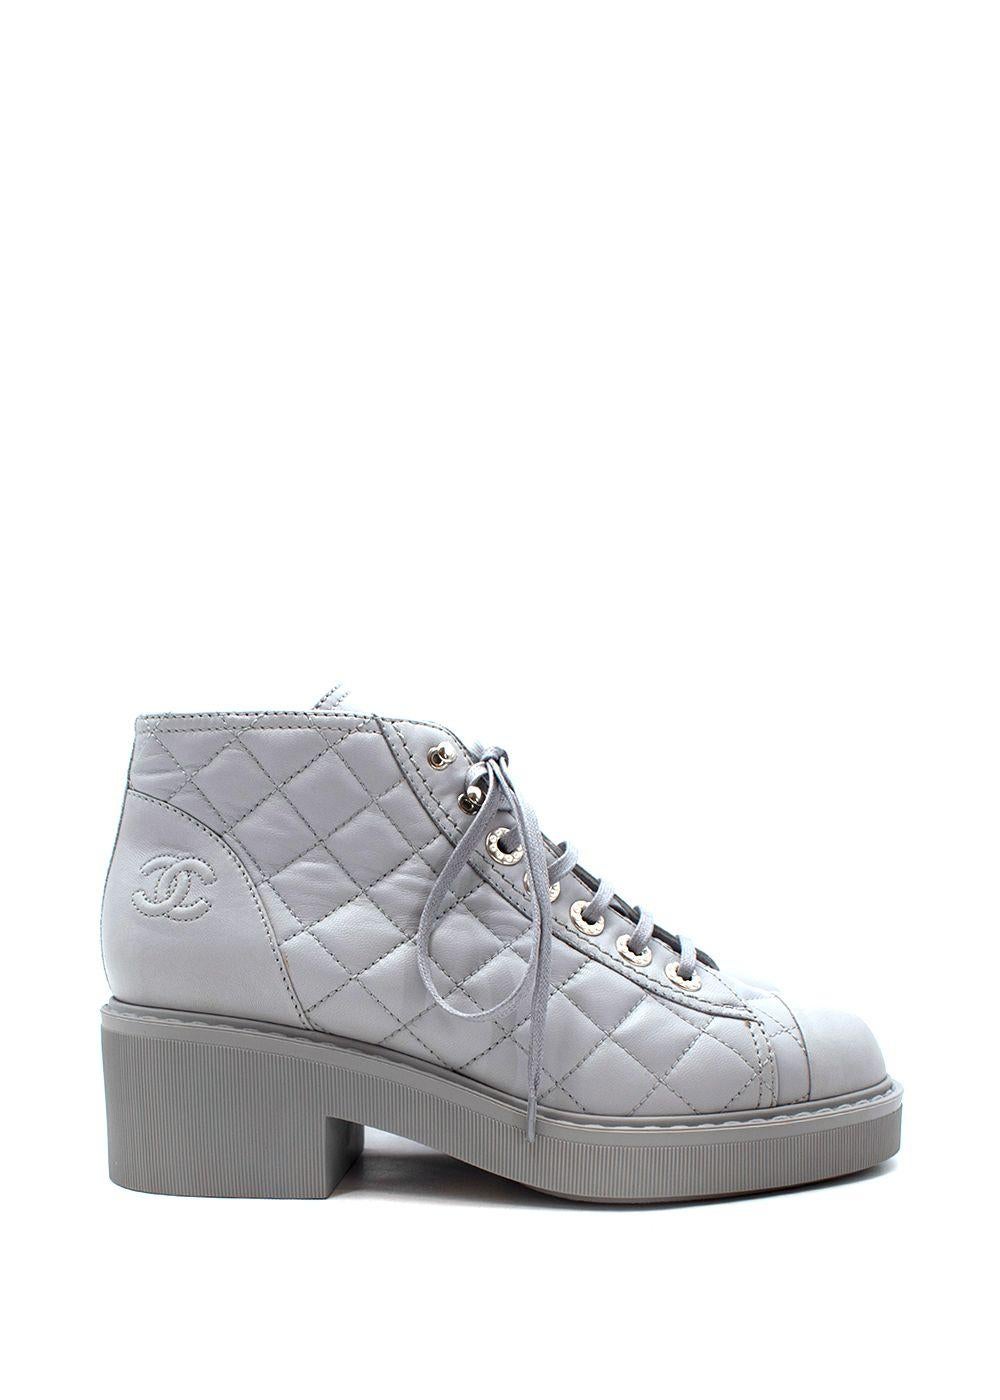 Chanel Pearl Grey Leather Quilted Combat Boots - Size 37.5 For Sale 2